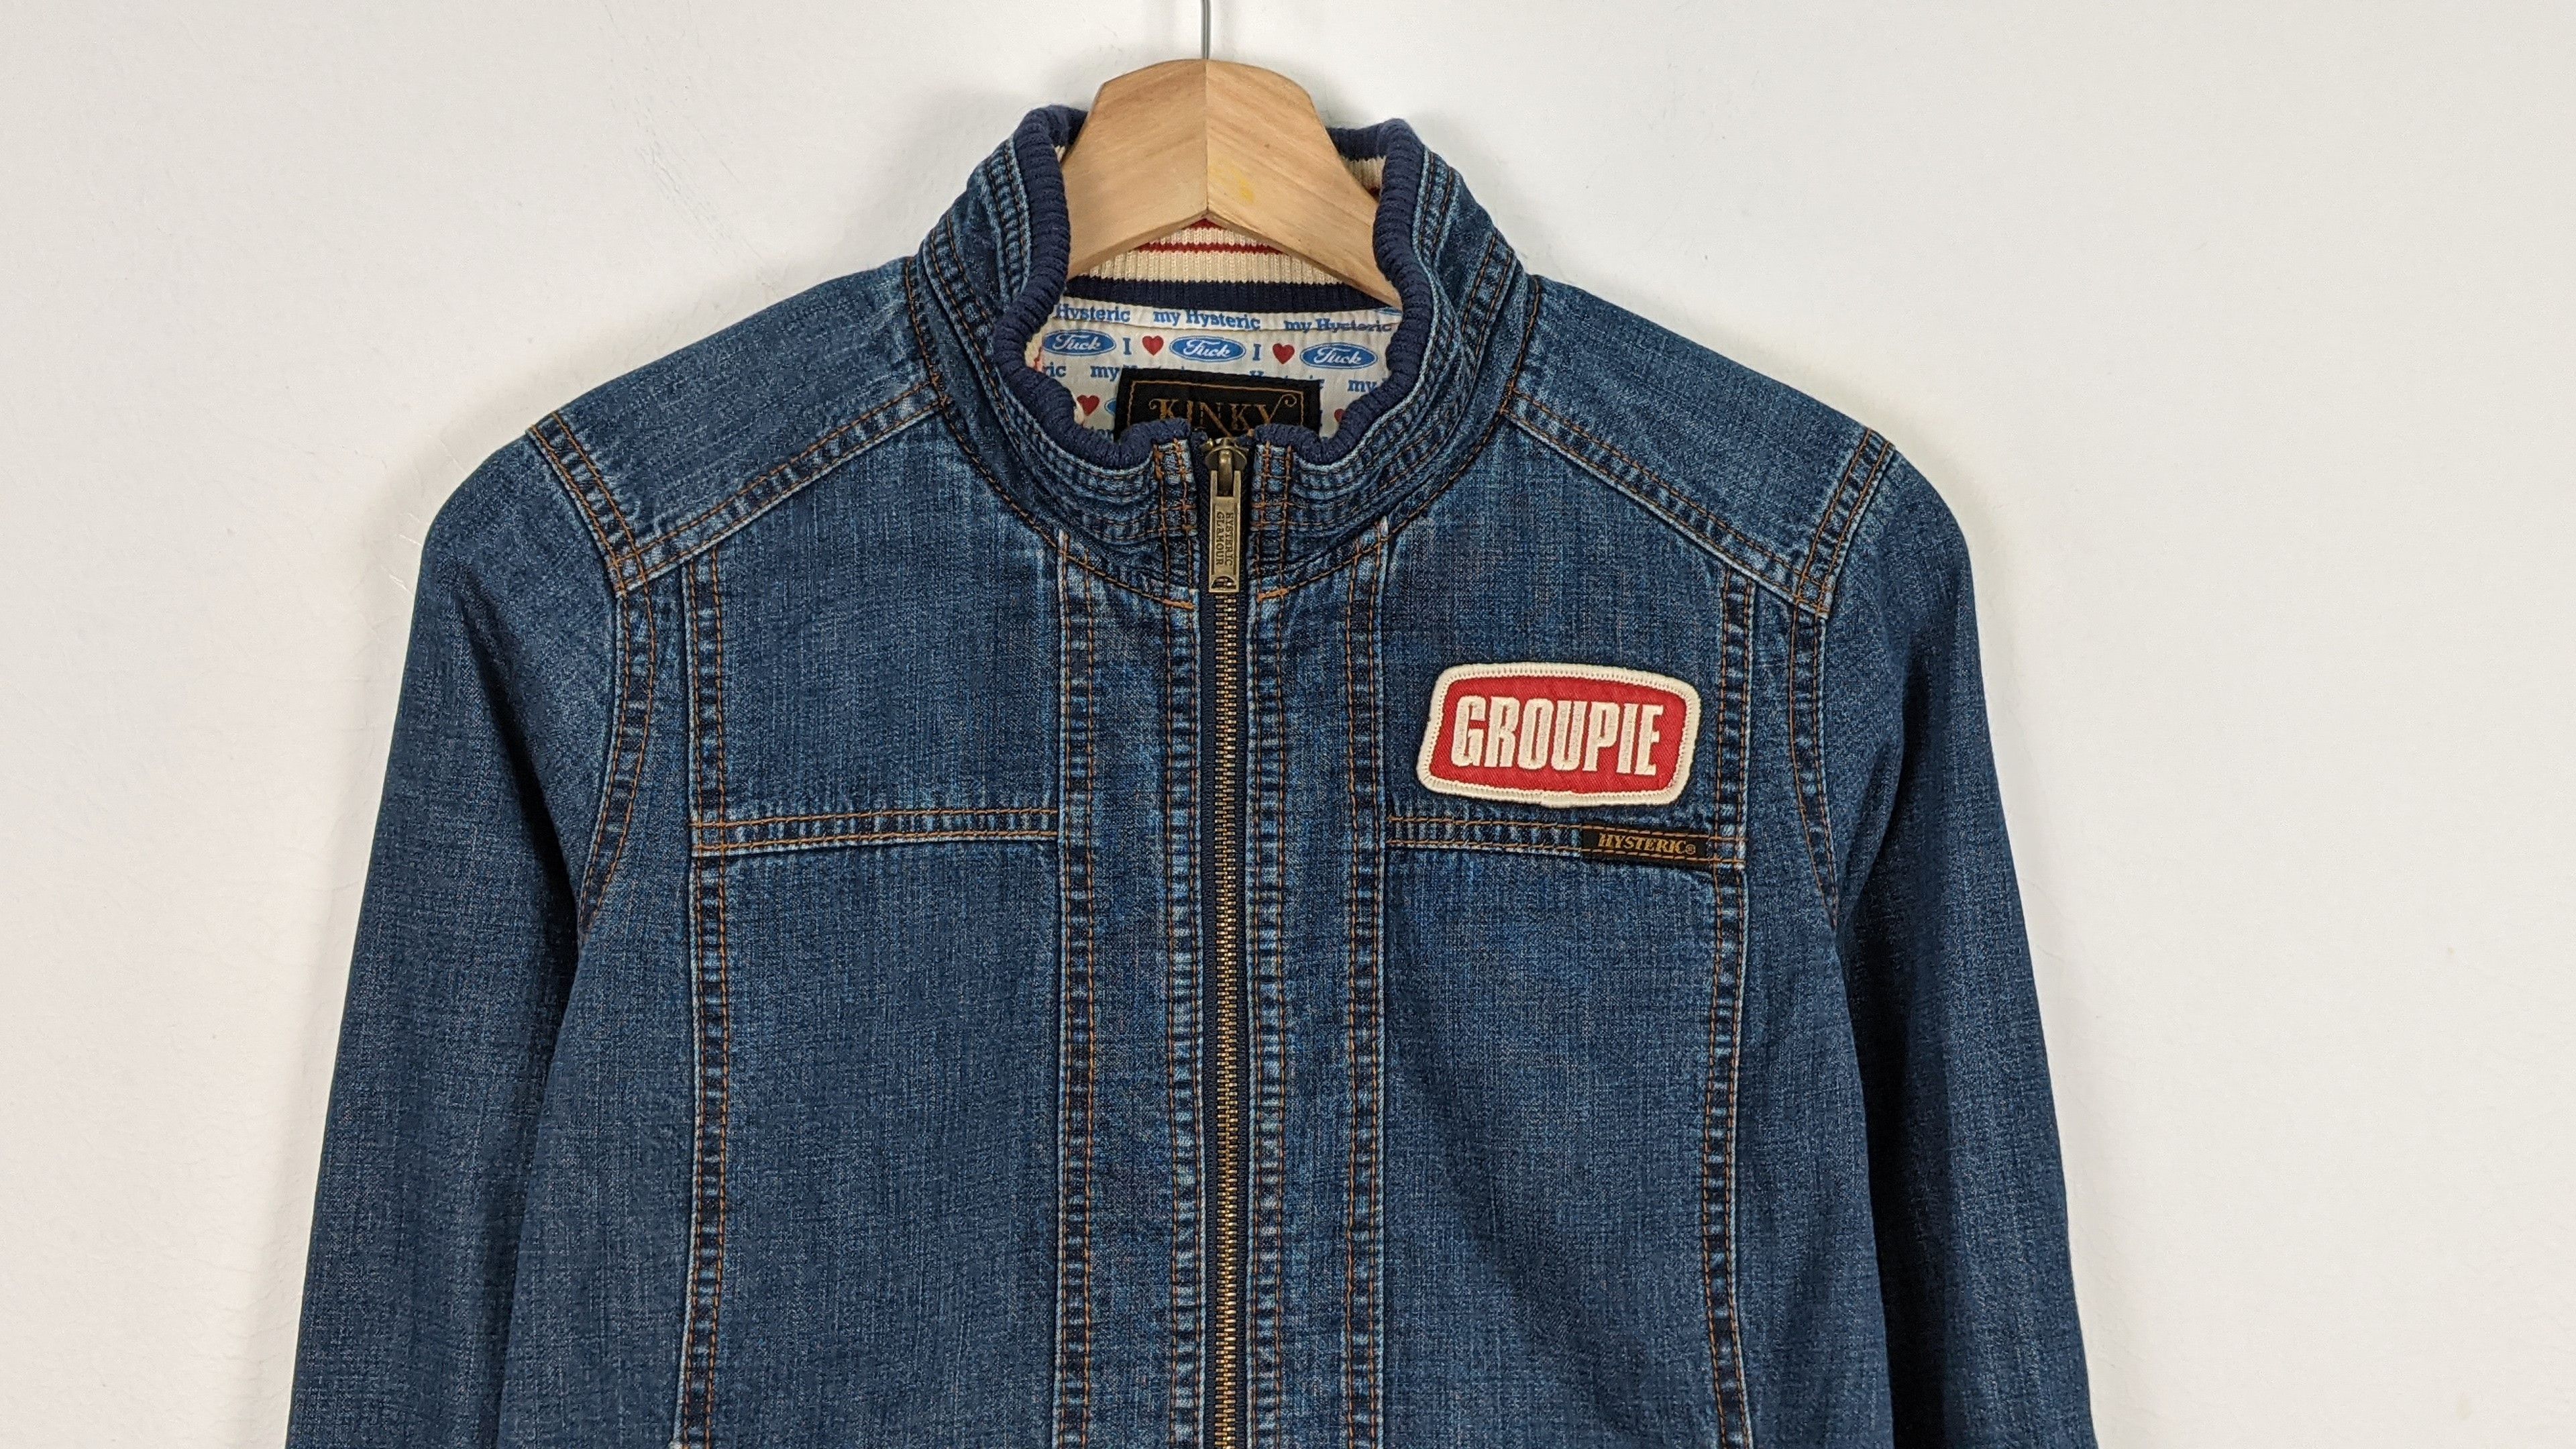 Hysteric Glamour Hysteric Glamour Kinky Denim Groupie Jeans Jacket Size US S / EU 44-46 / 1 - 2 Preview